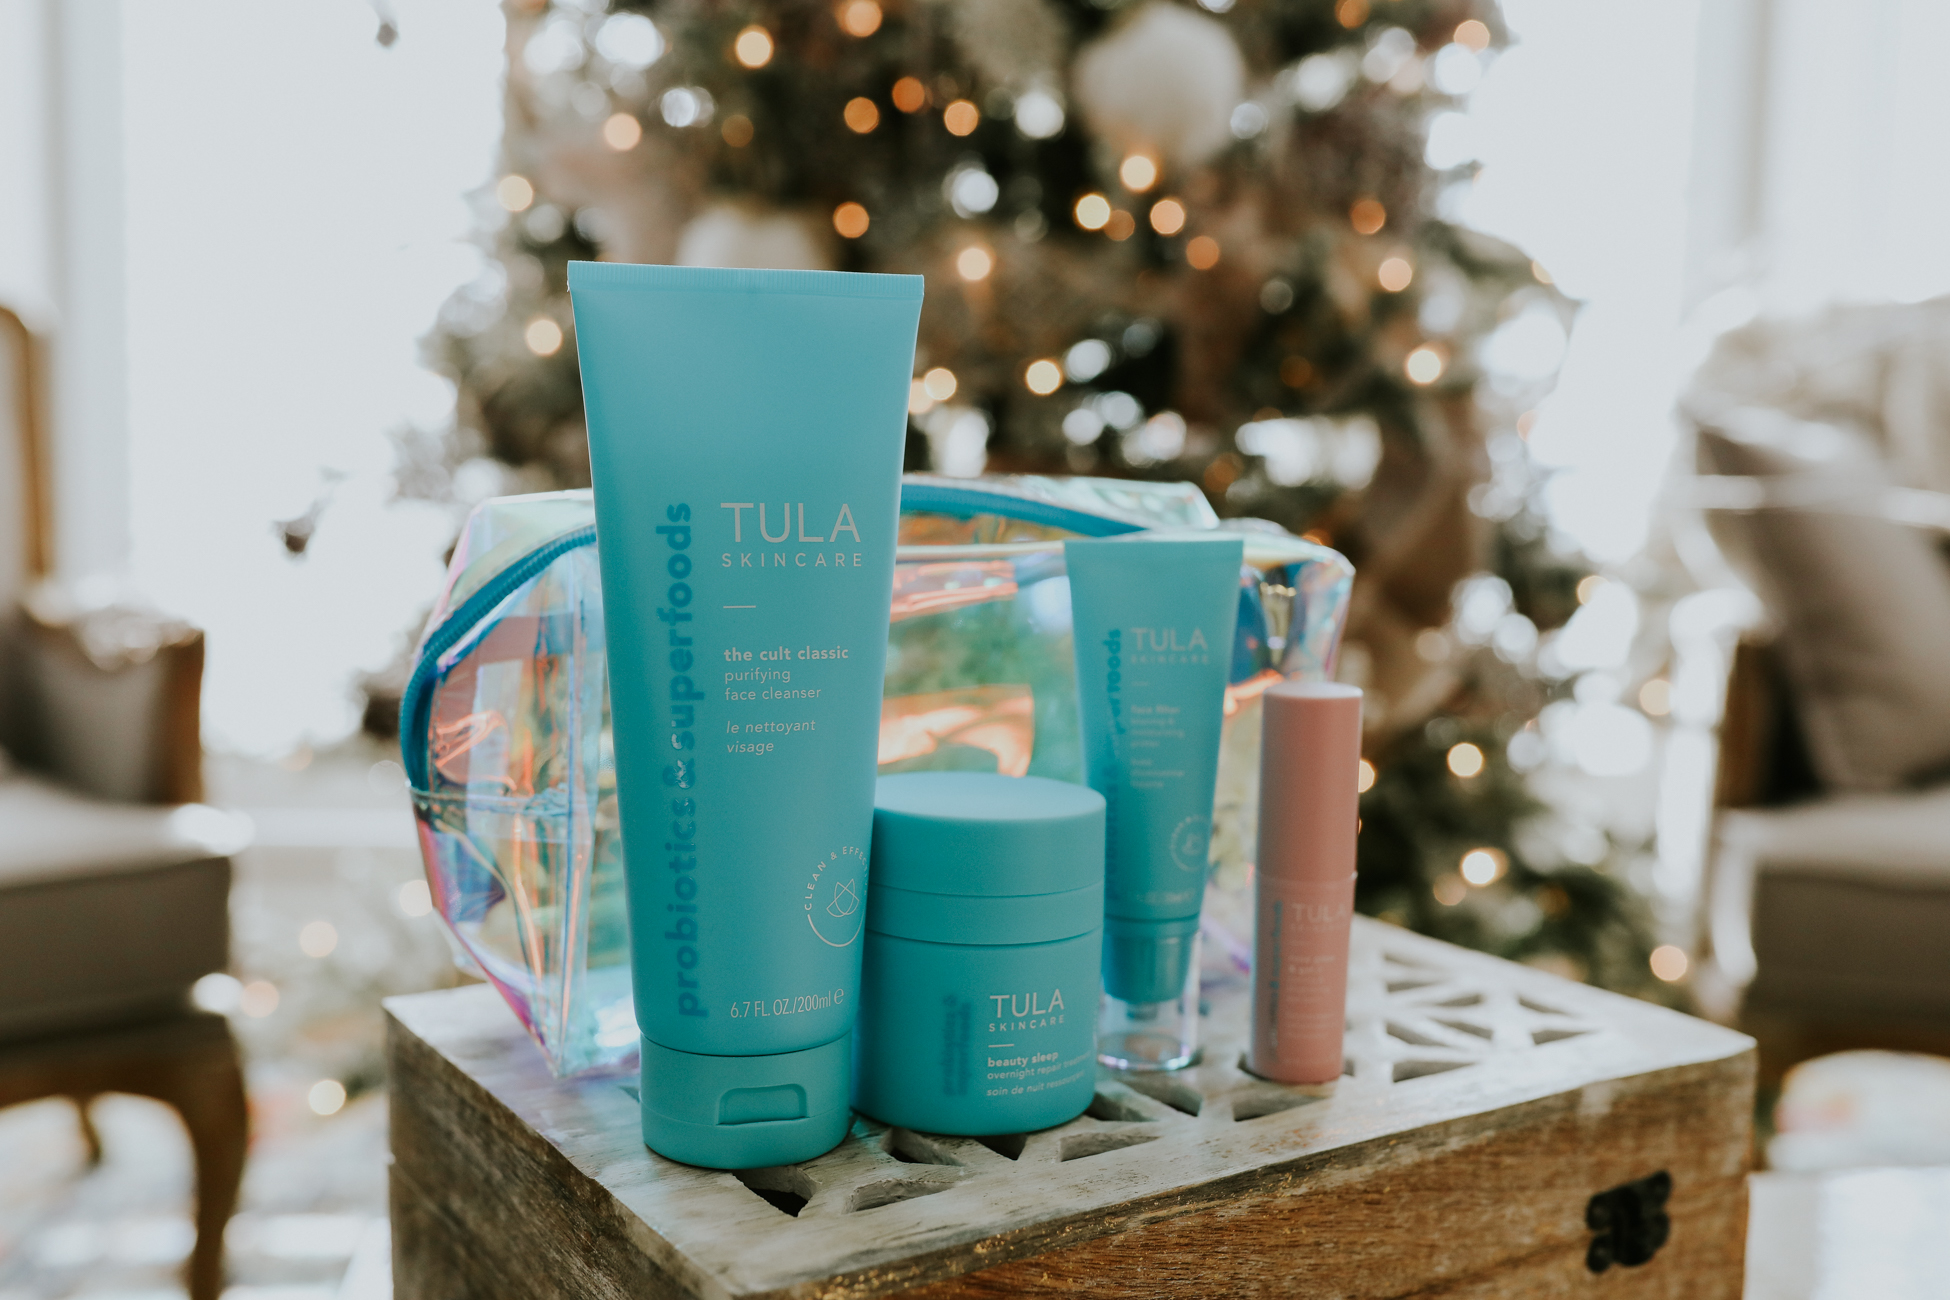 new year new skin goals, tula skincare, tula probiotic skin care, tula face filter // grace white a southern drawl